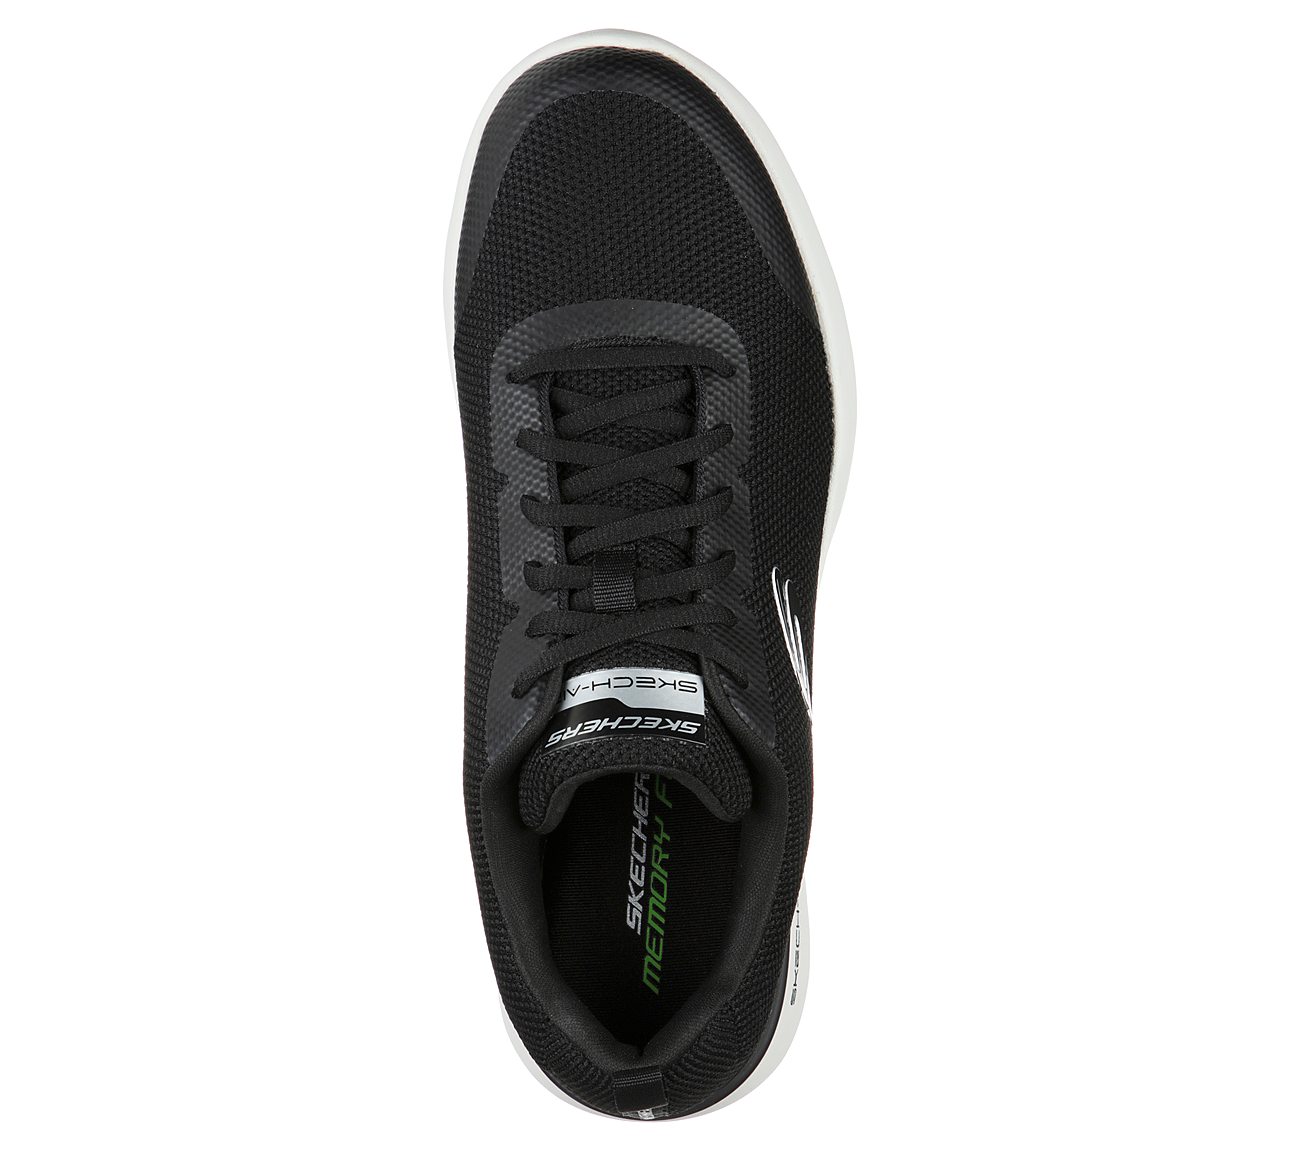 SKECH-AIR DYNAMIGHT - WINLY, BLACK/WHITE Footwear Top View